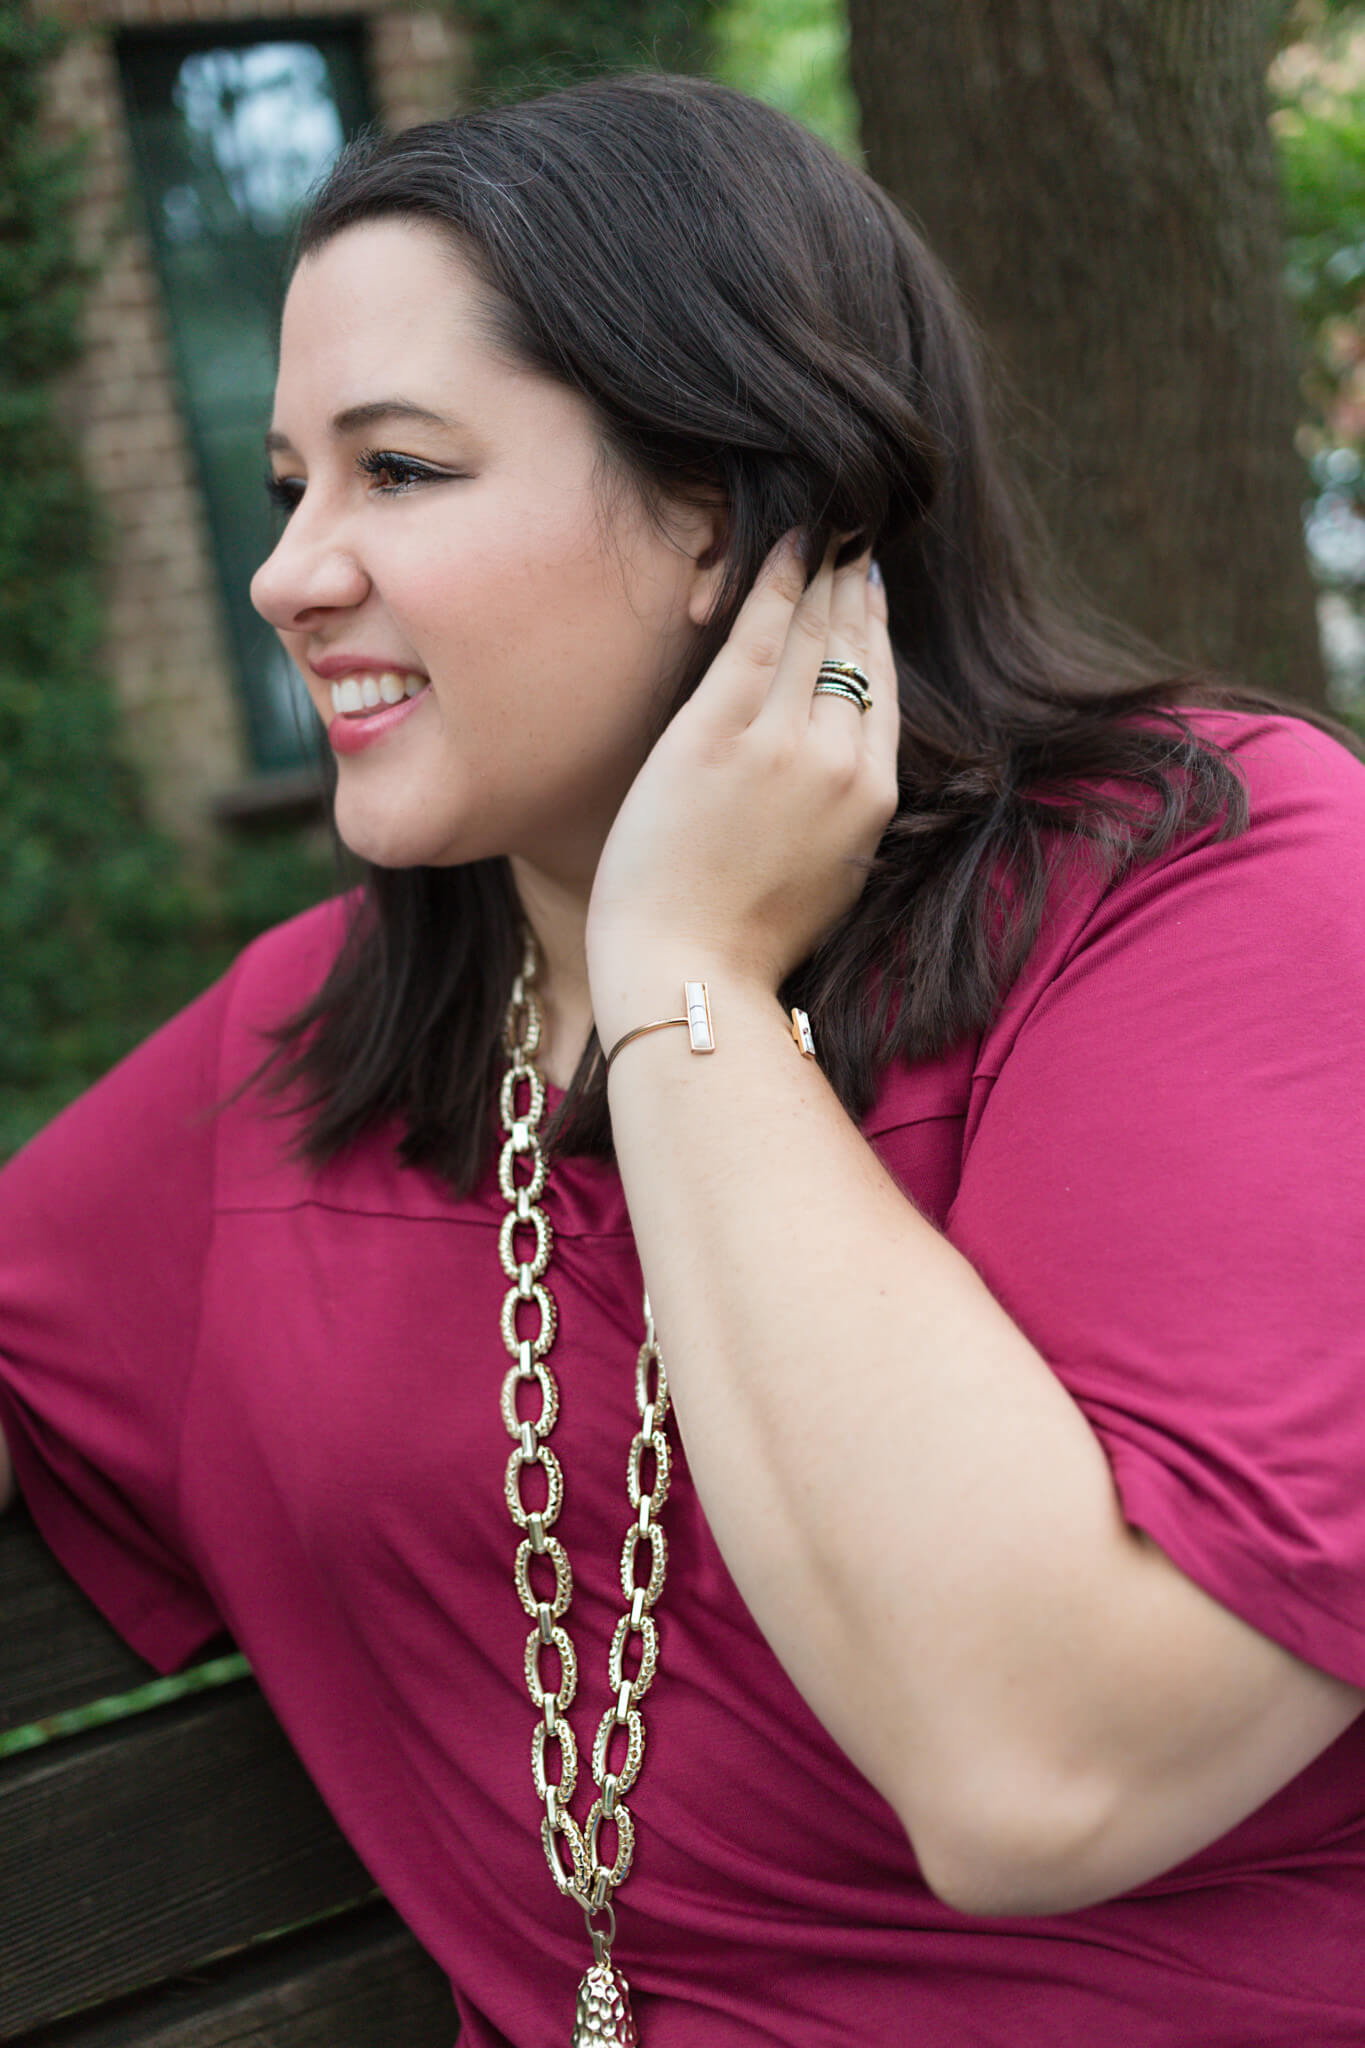 A fringe pair of jeans, a comfortable cotton top and a statement necklace makes for the perfect weekend outfit during this fall transition. This outfit is featured in the latest blog post on Something Gold, Something Blue, a curvy style blog by Emily Bastedo.